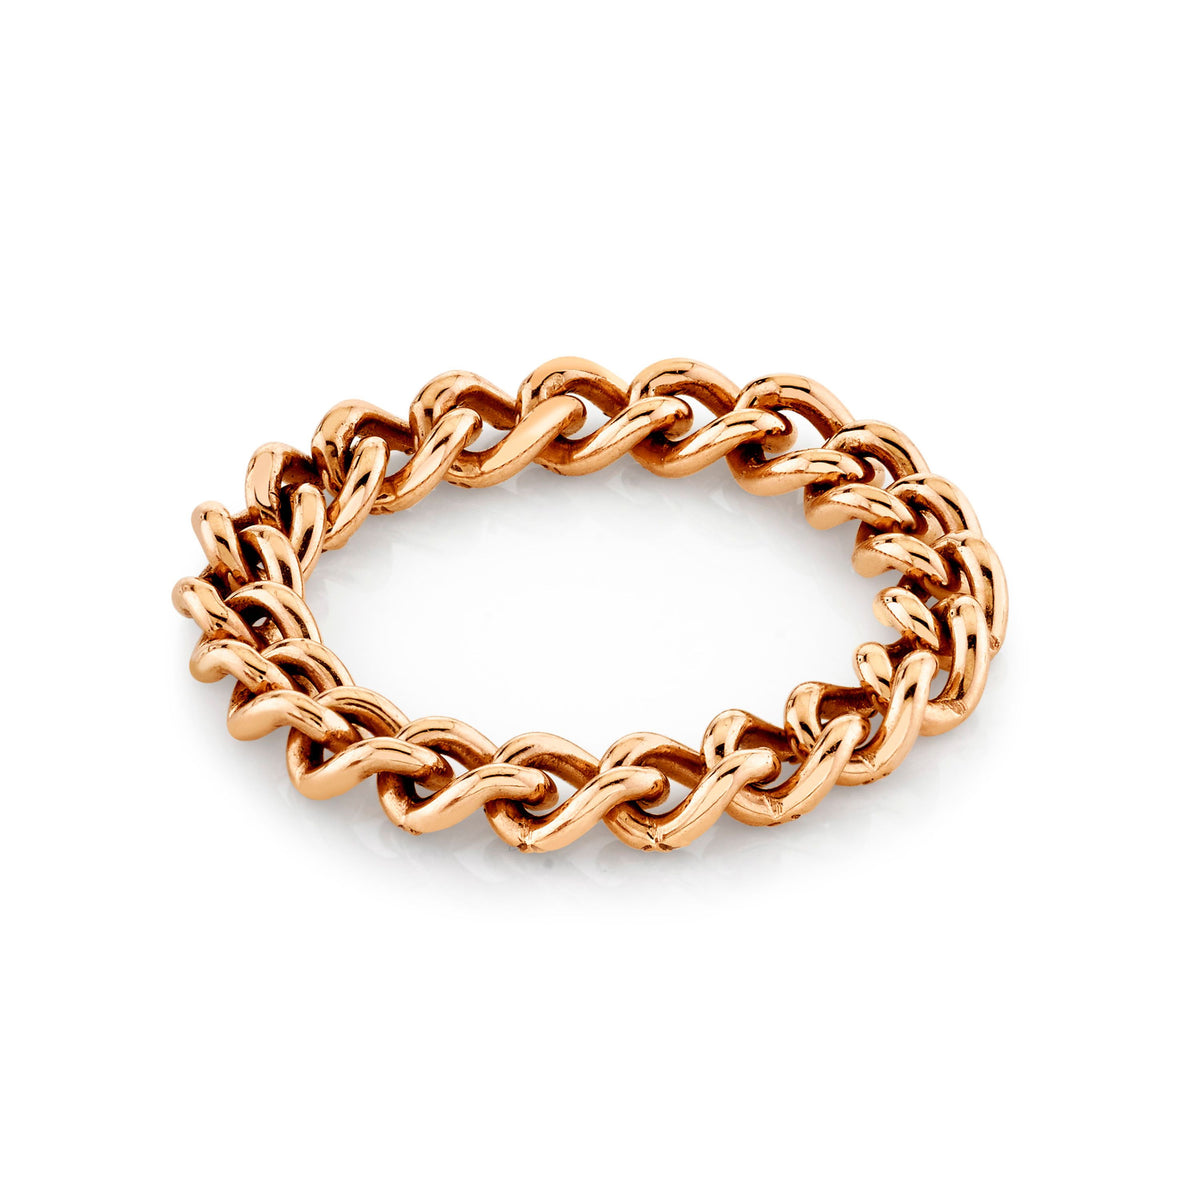 SOLID GOLD BABY LINK RING